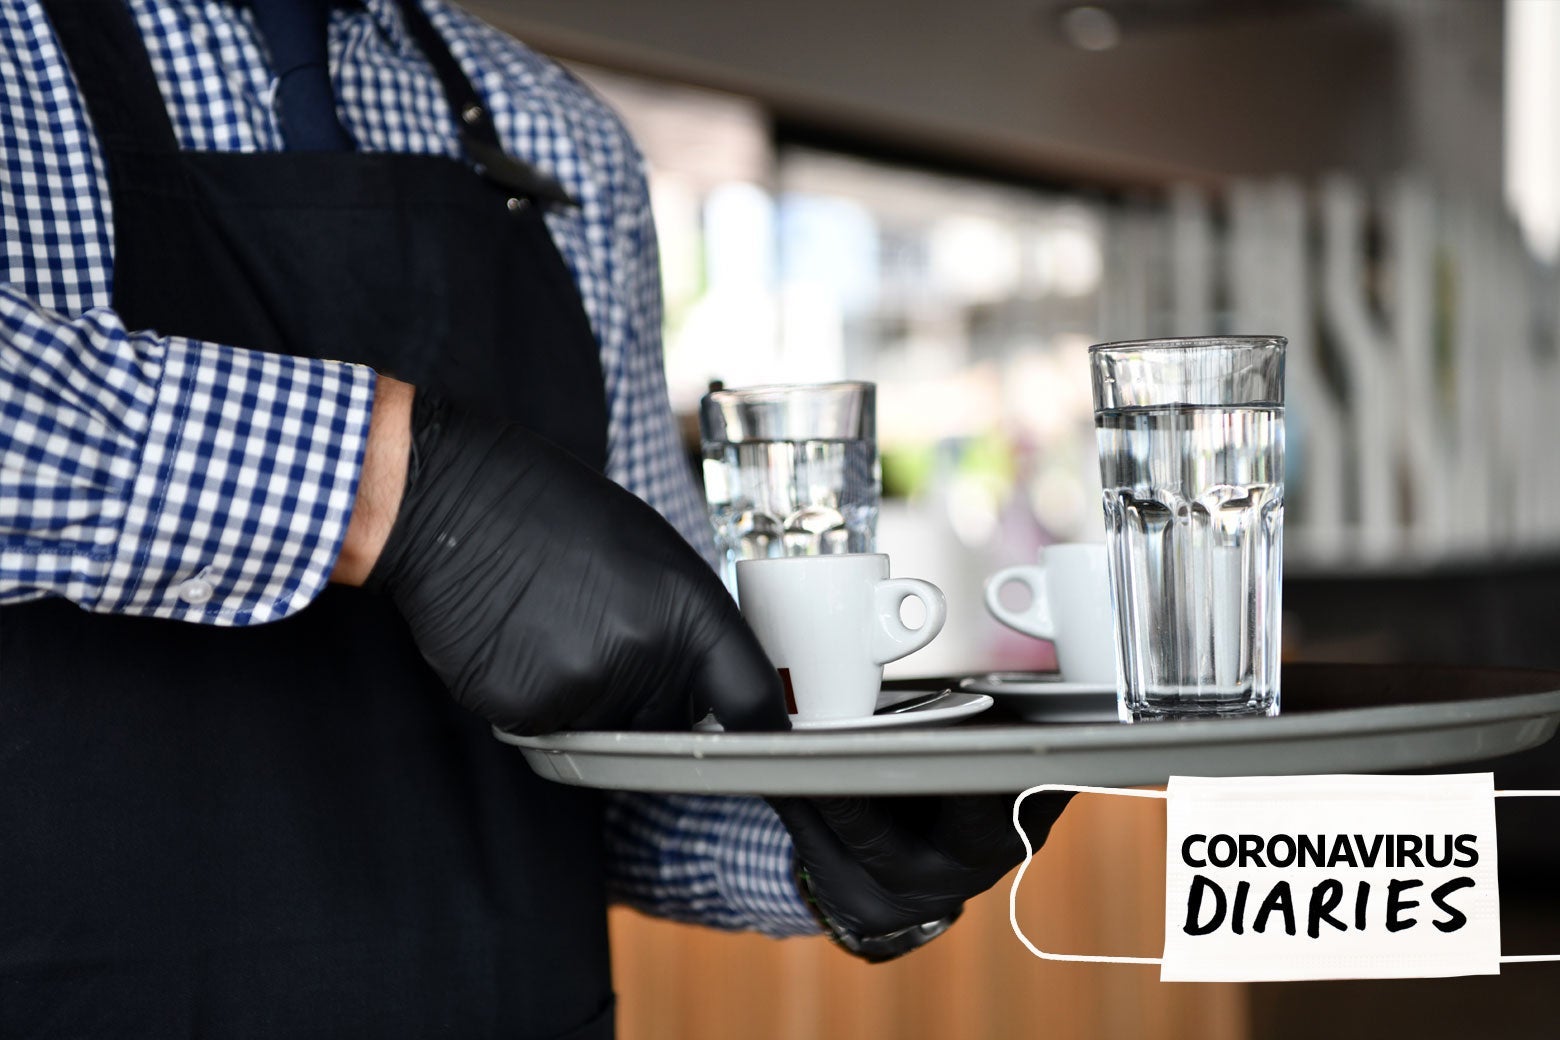 A waiter wearing gloves holds a tray of cups of water and espresso.